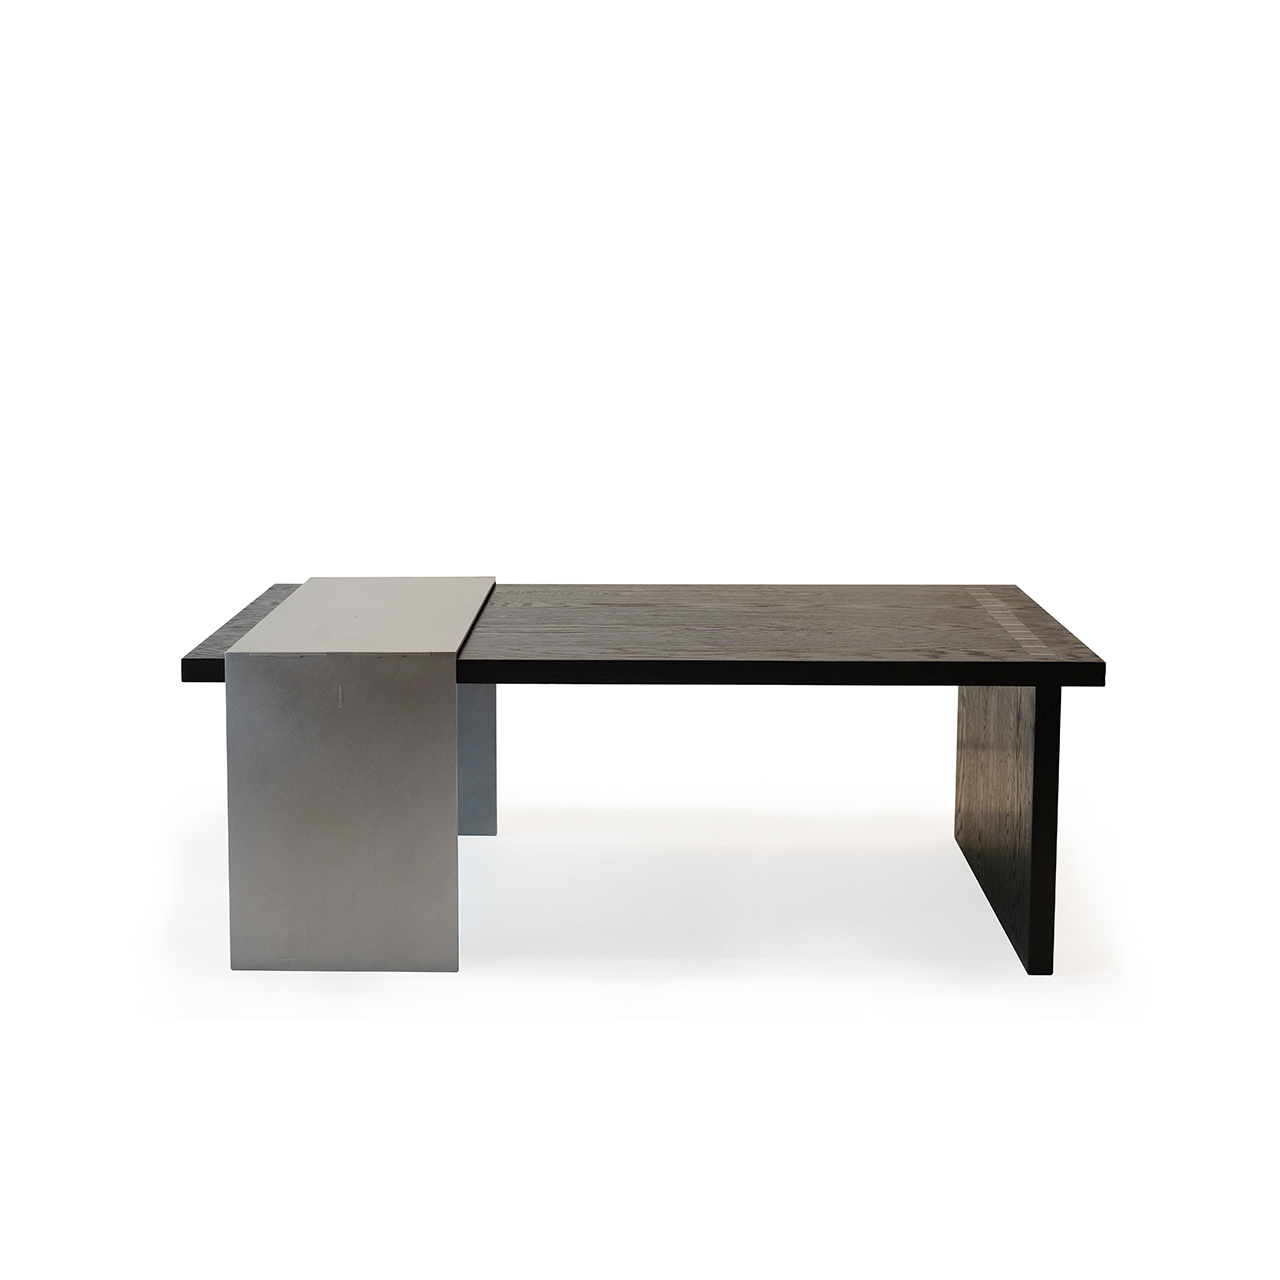 SUITE coffee table